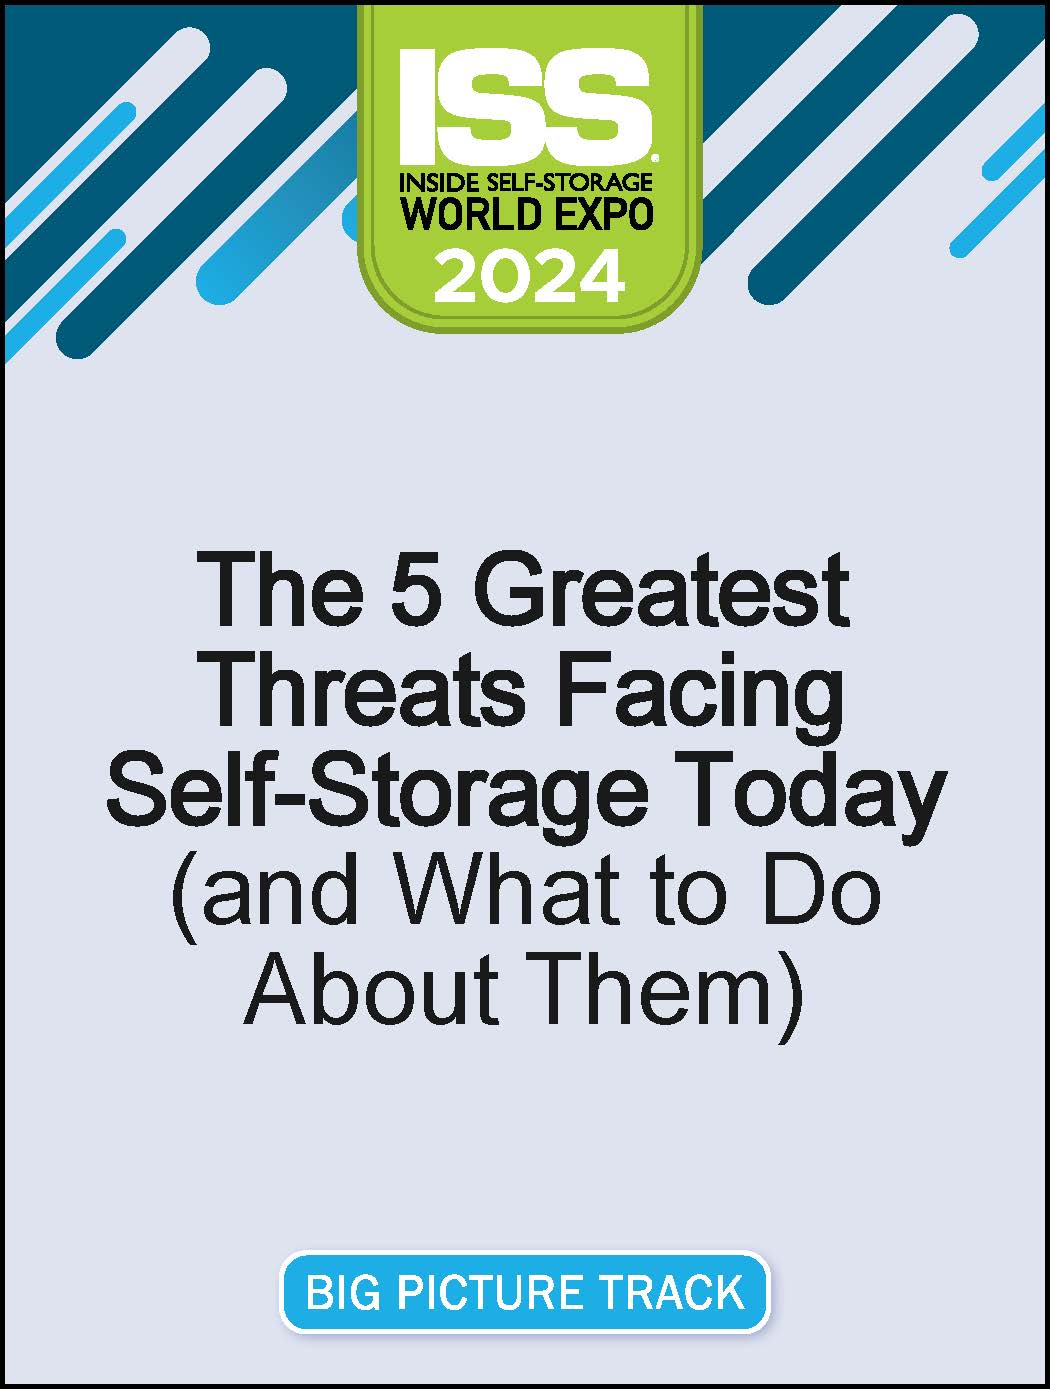 Video Pre-Order - The 5 Greatest Threats Facing Self-Storage Today (and What to Do About Them)